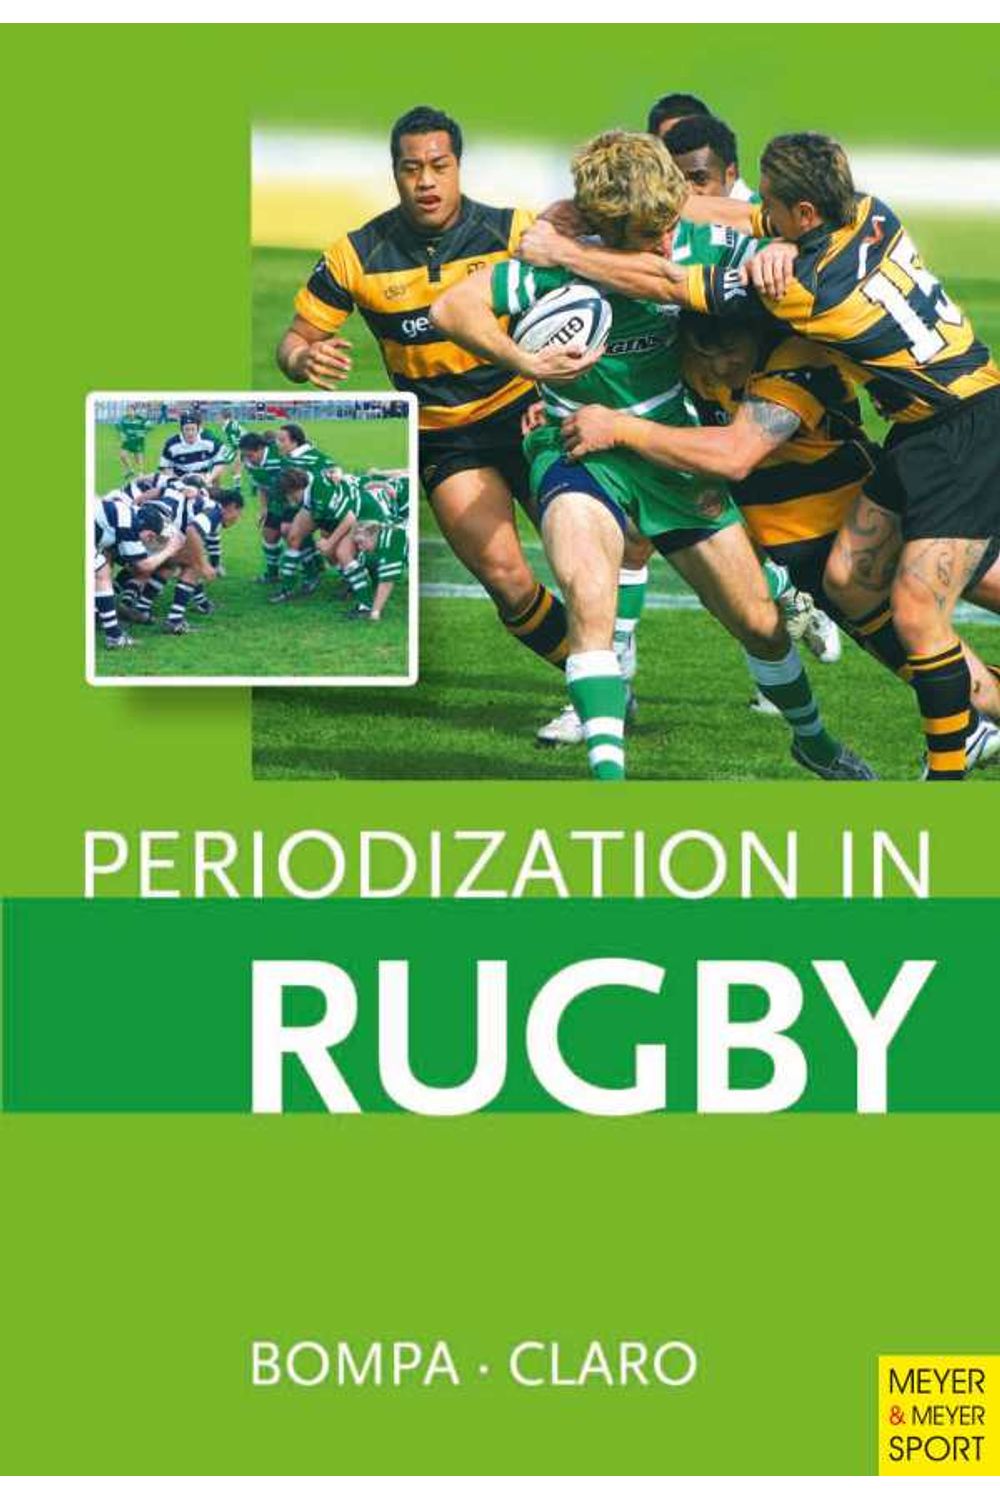 bw-periodization-in-rugby-meyer-meyer-sport-9781841268453